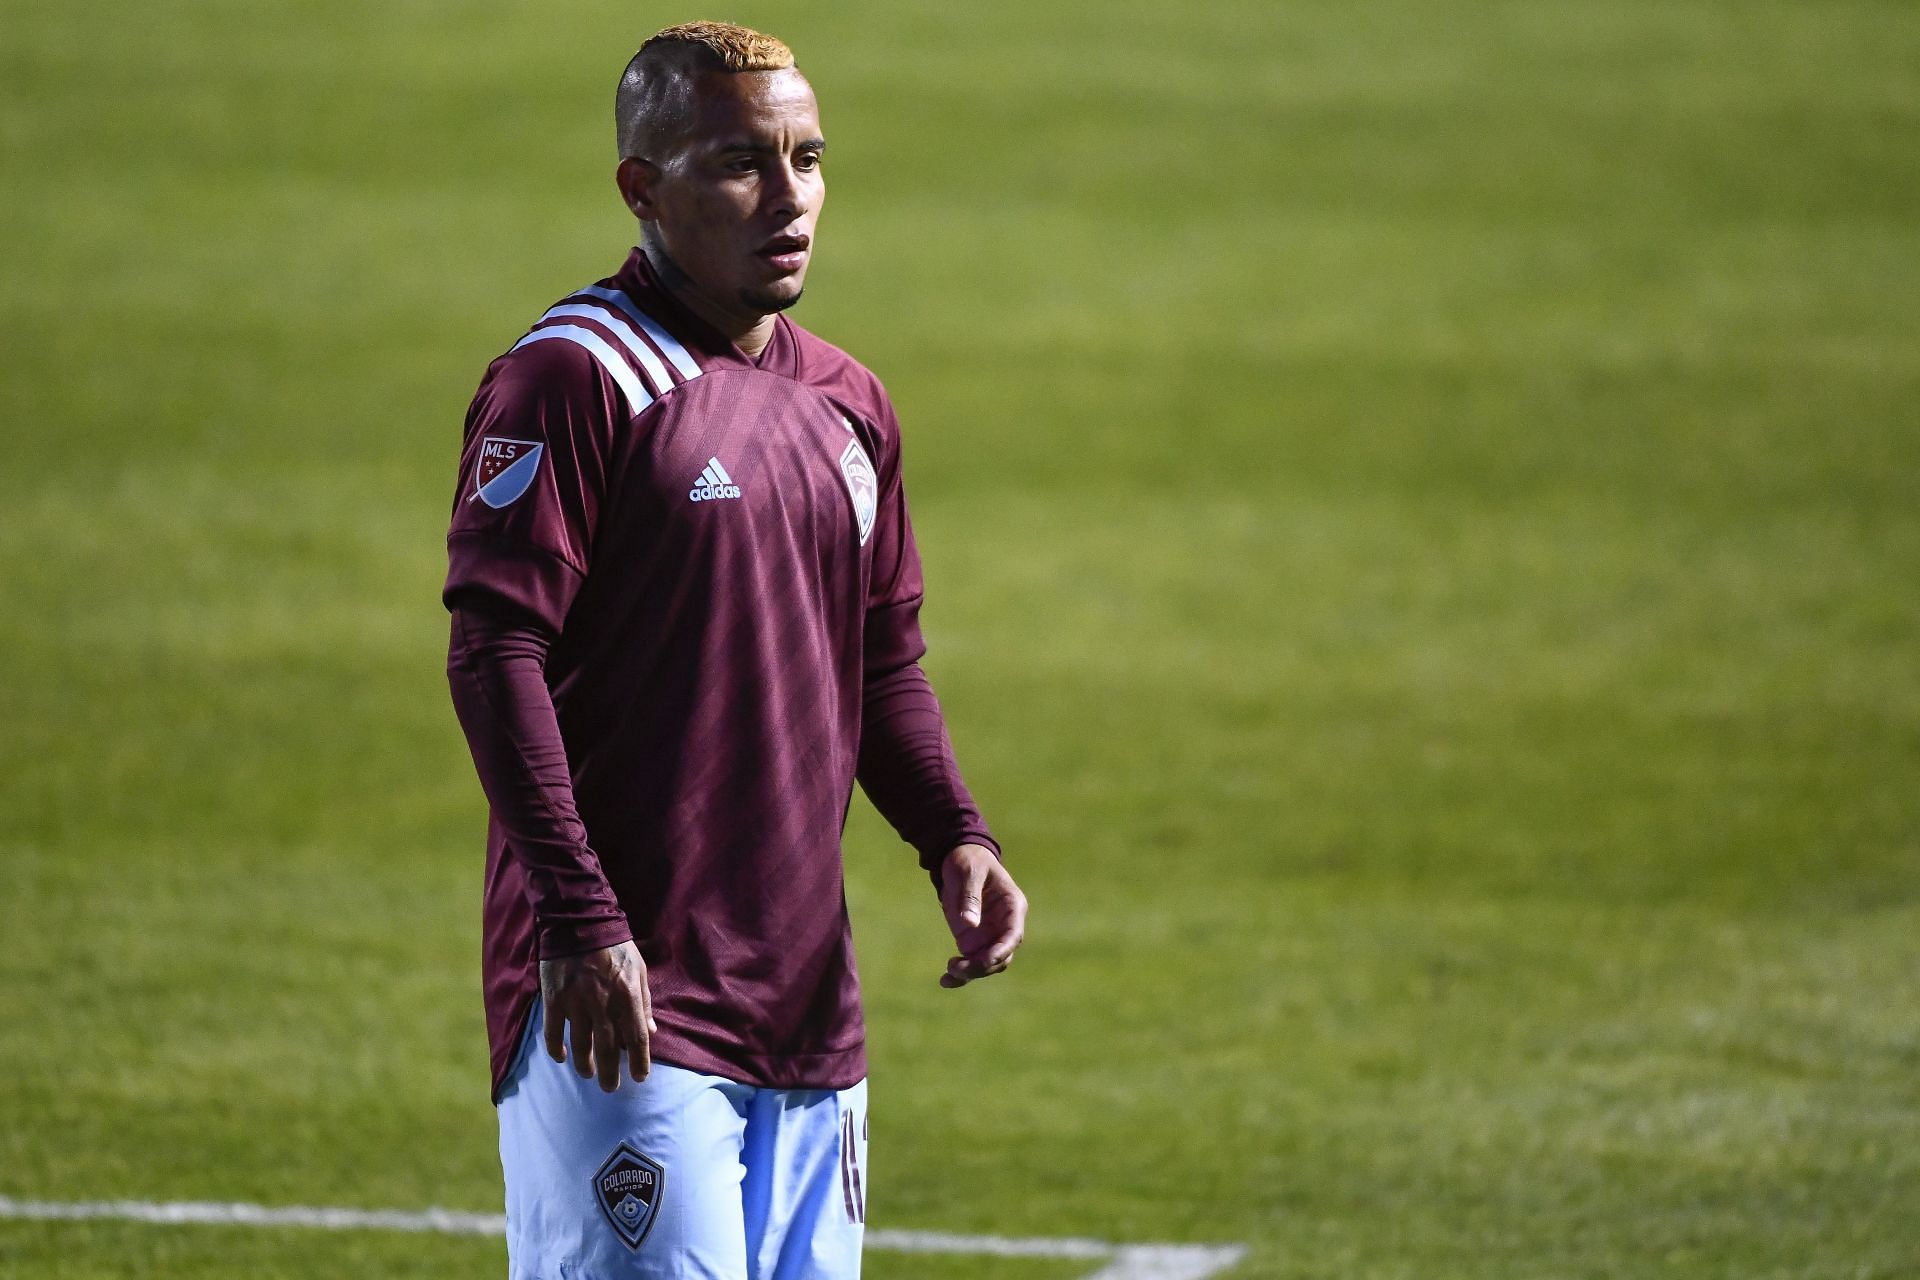 Colorado Rapids face Seattle Sounders in their upcoming MLS fixture.